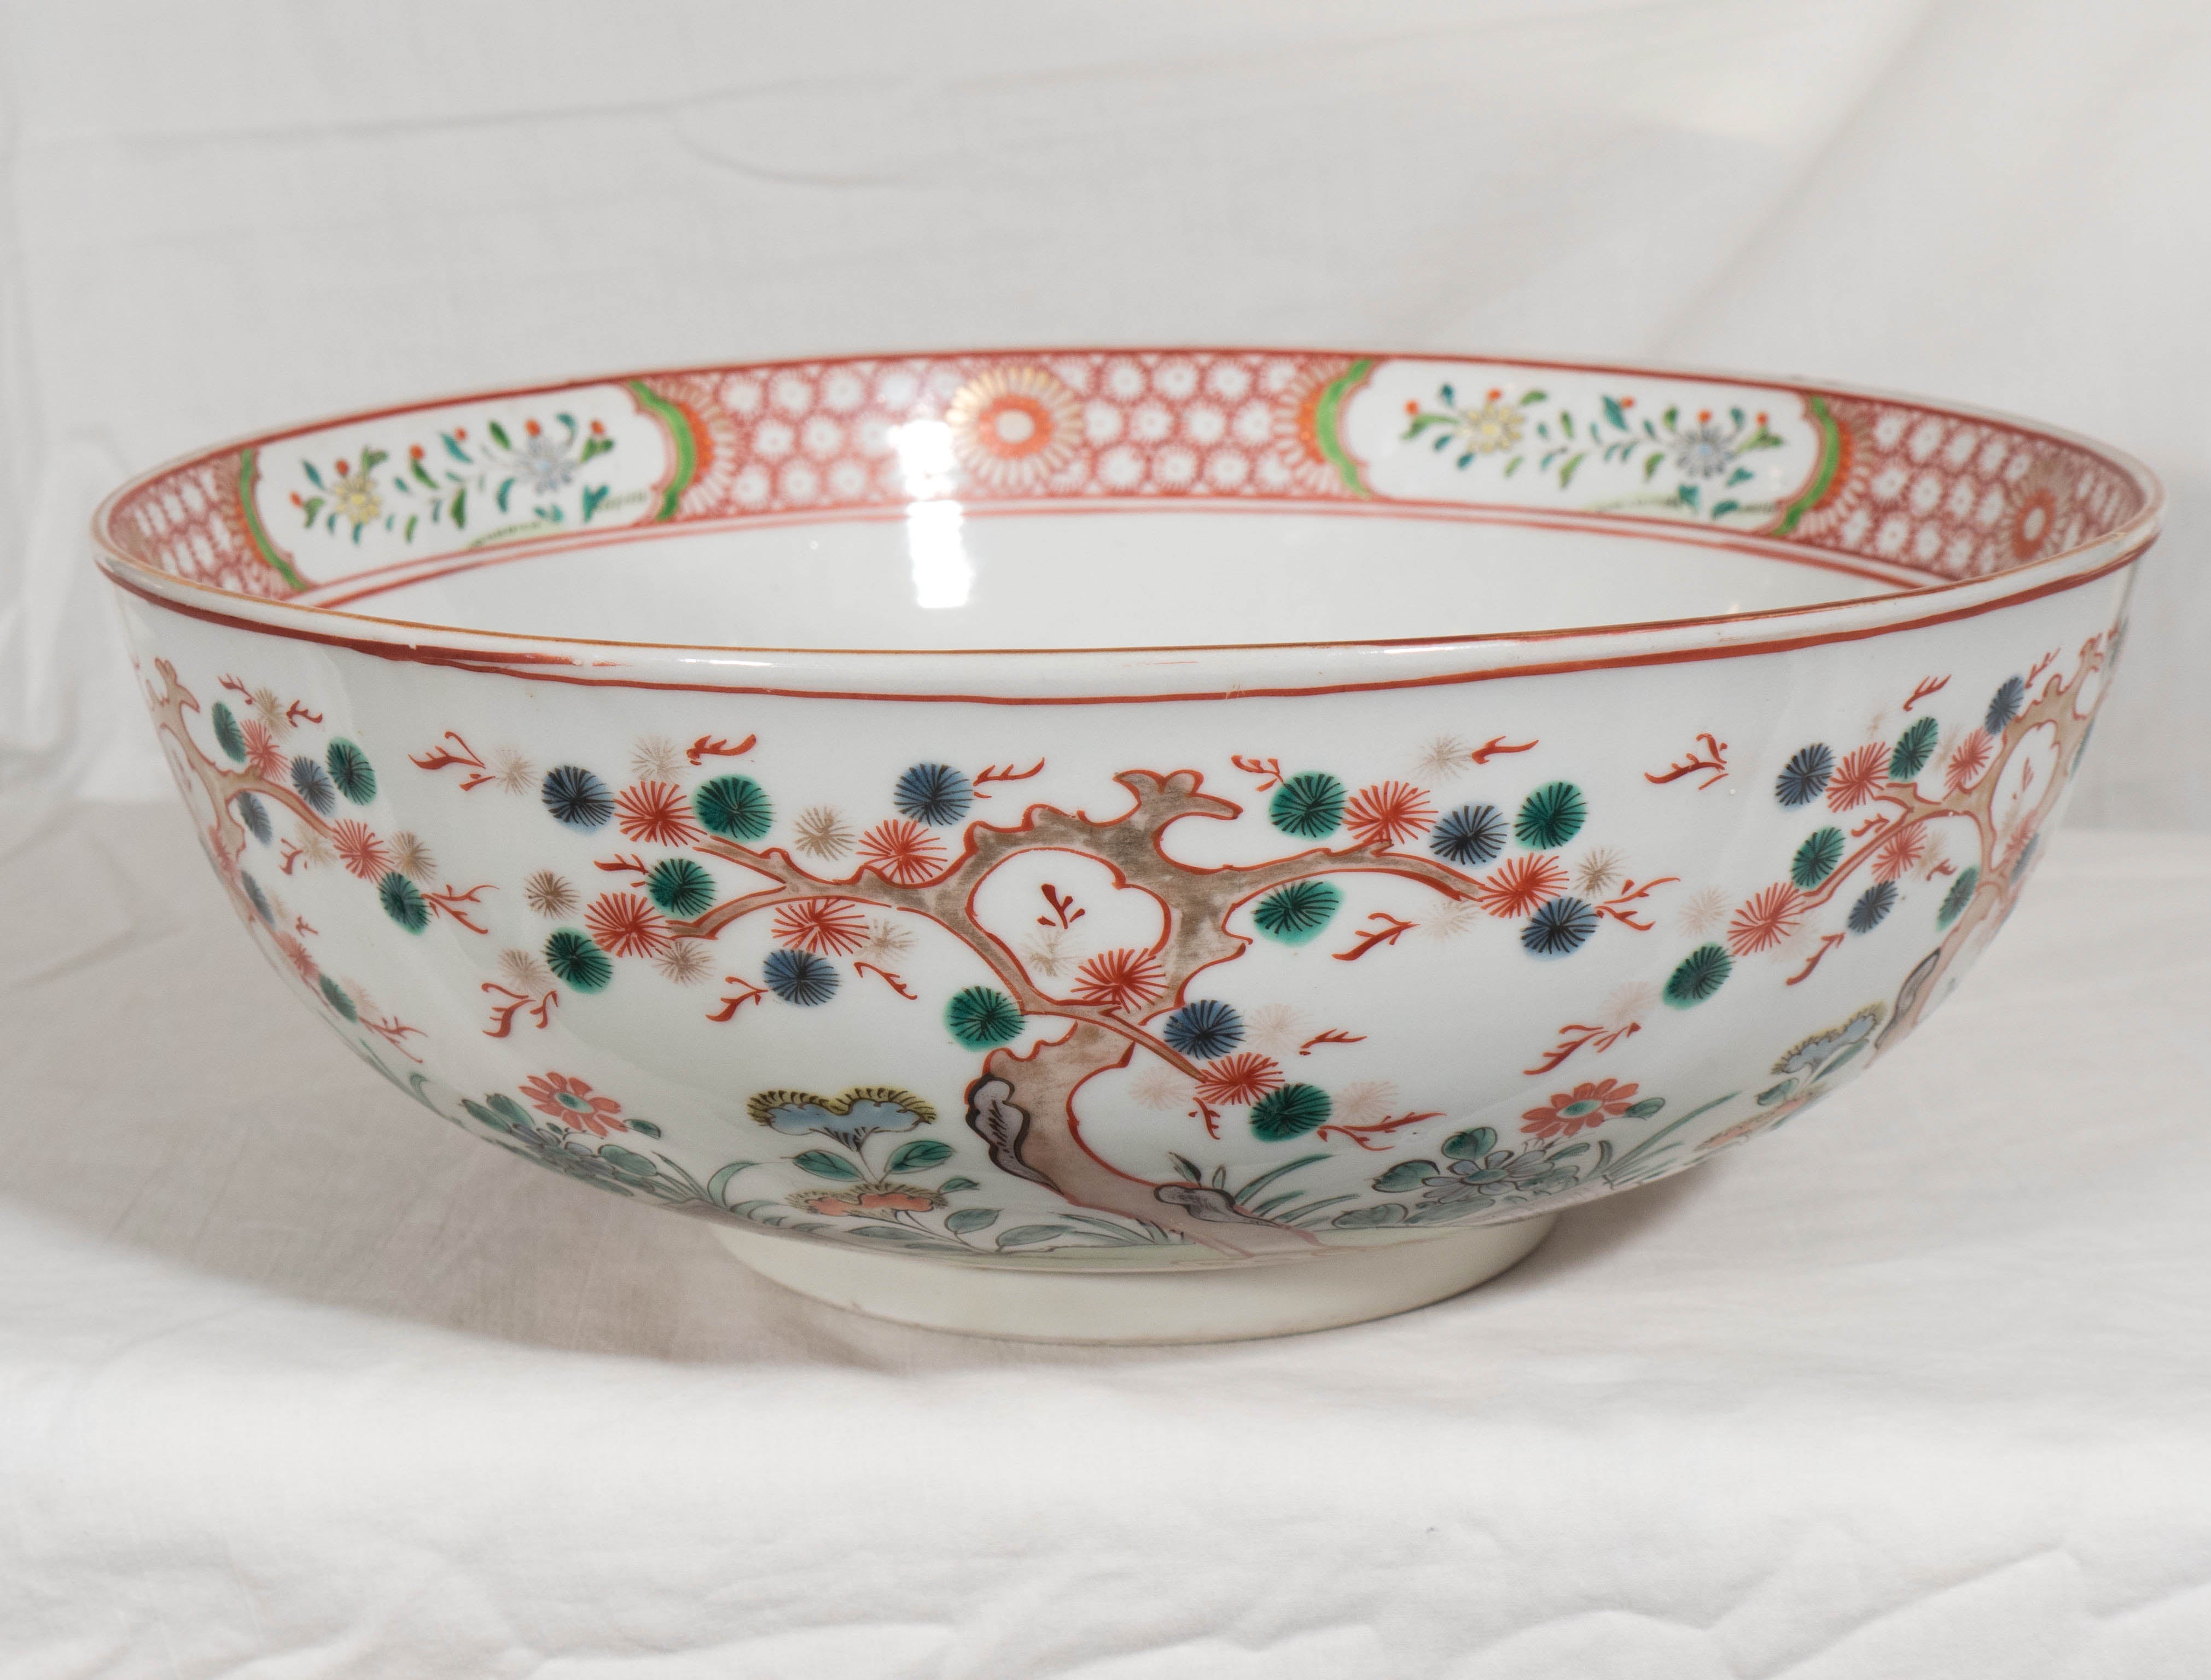 A Large 19th Century Japanese Bowl with Kakiemon Decoration